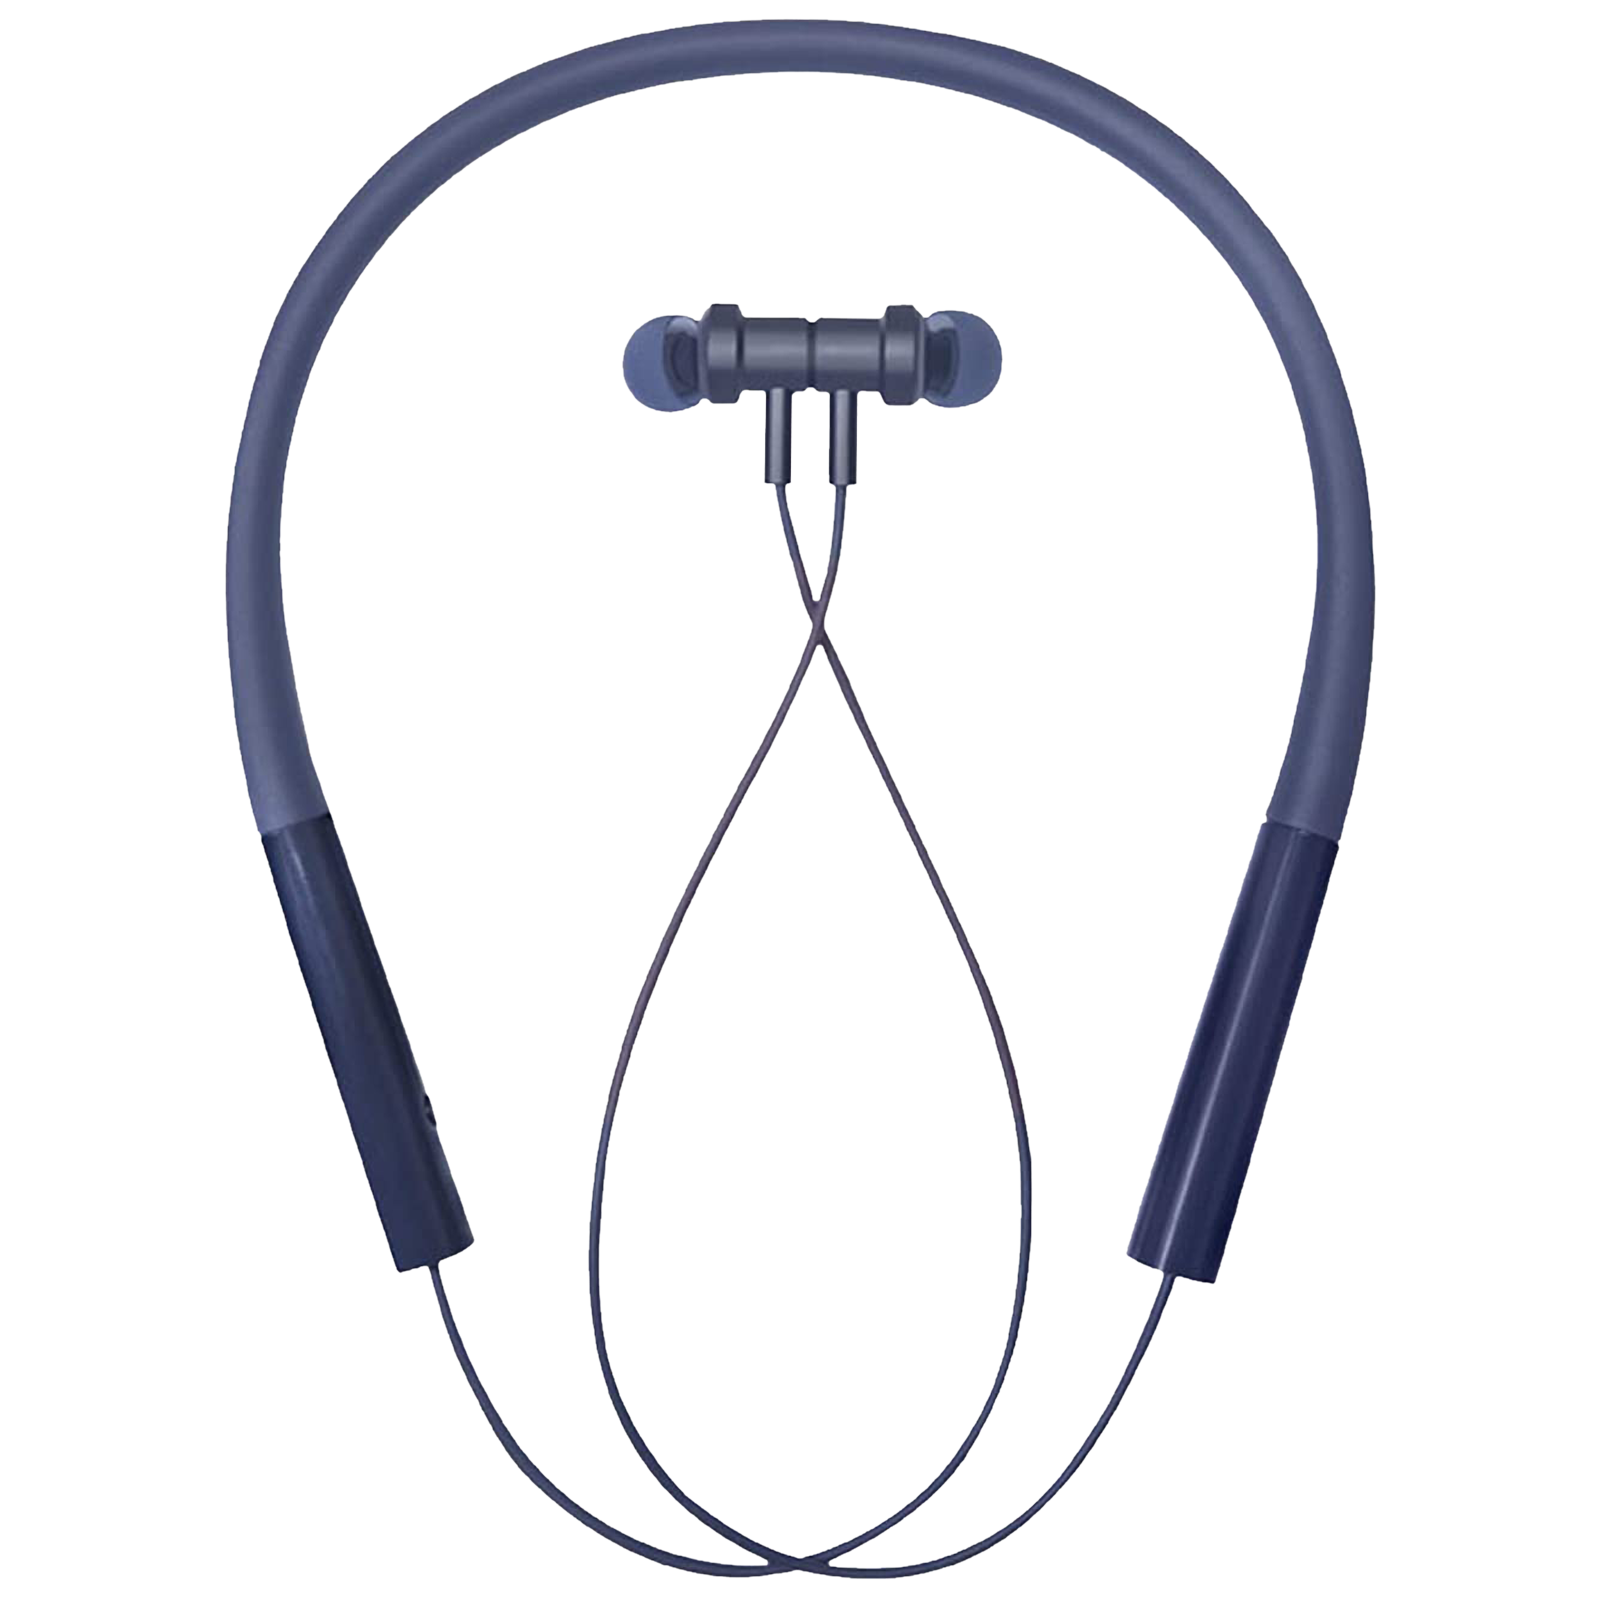 Xiaomi Pro BHR4204IN Neckband with Active Noise Cancellation (IPX5 Splash & Sweatproof, 20 Hours Playtime, Blue)